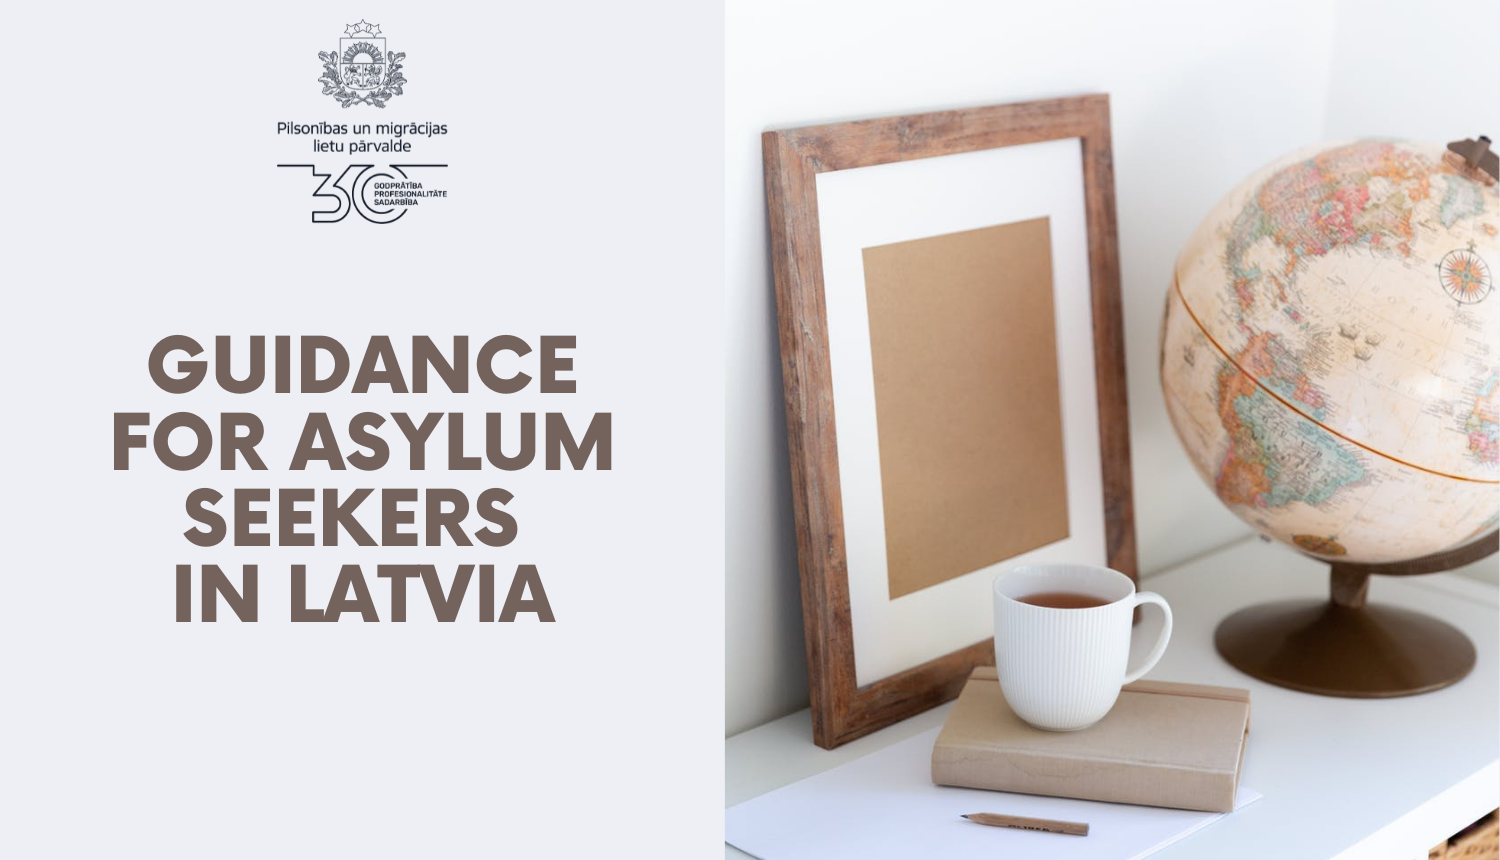 Text: Guidance for asylum seekers  in Latvia, on the tale are coffee mug, the globe and other items